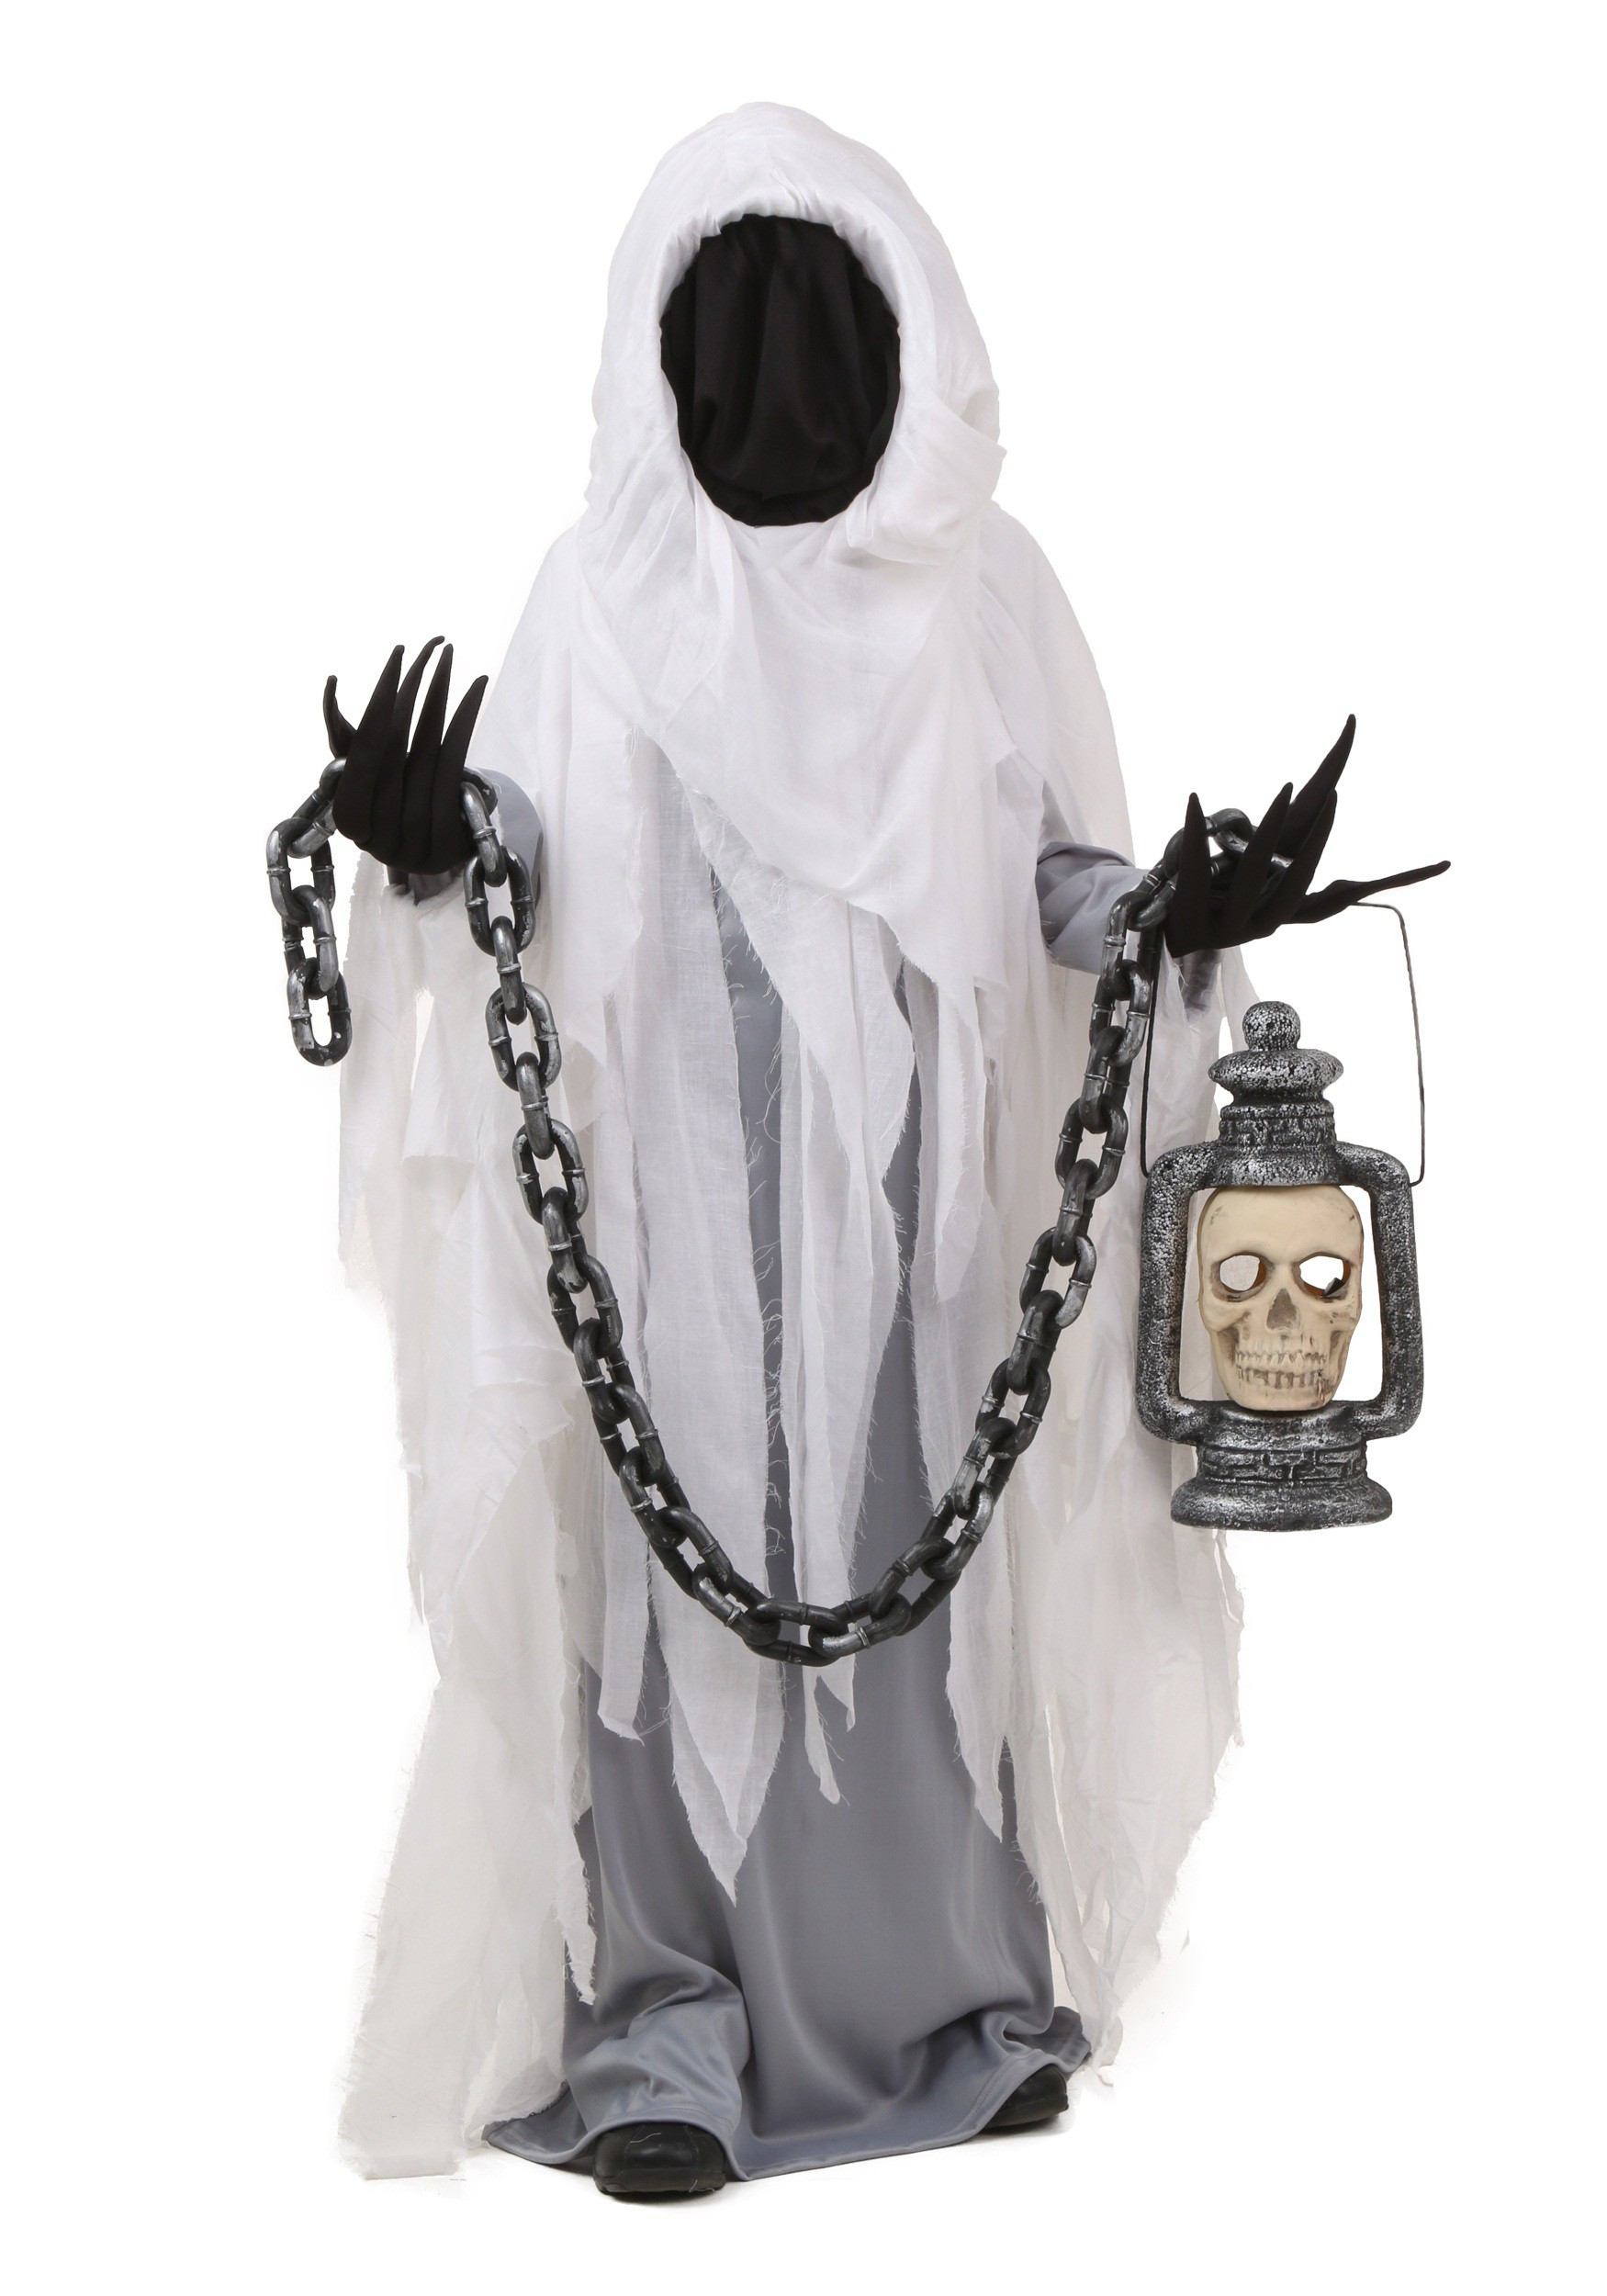 Scary DIY Halloween Costumes
 Child Spooky Ghost Costume